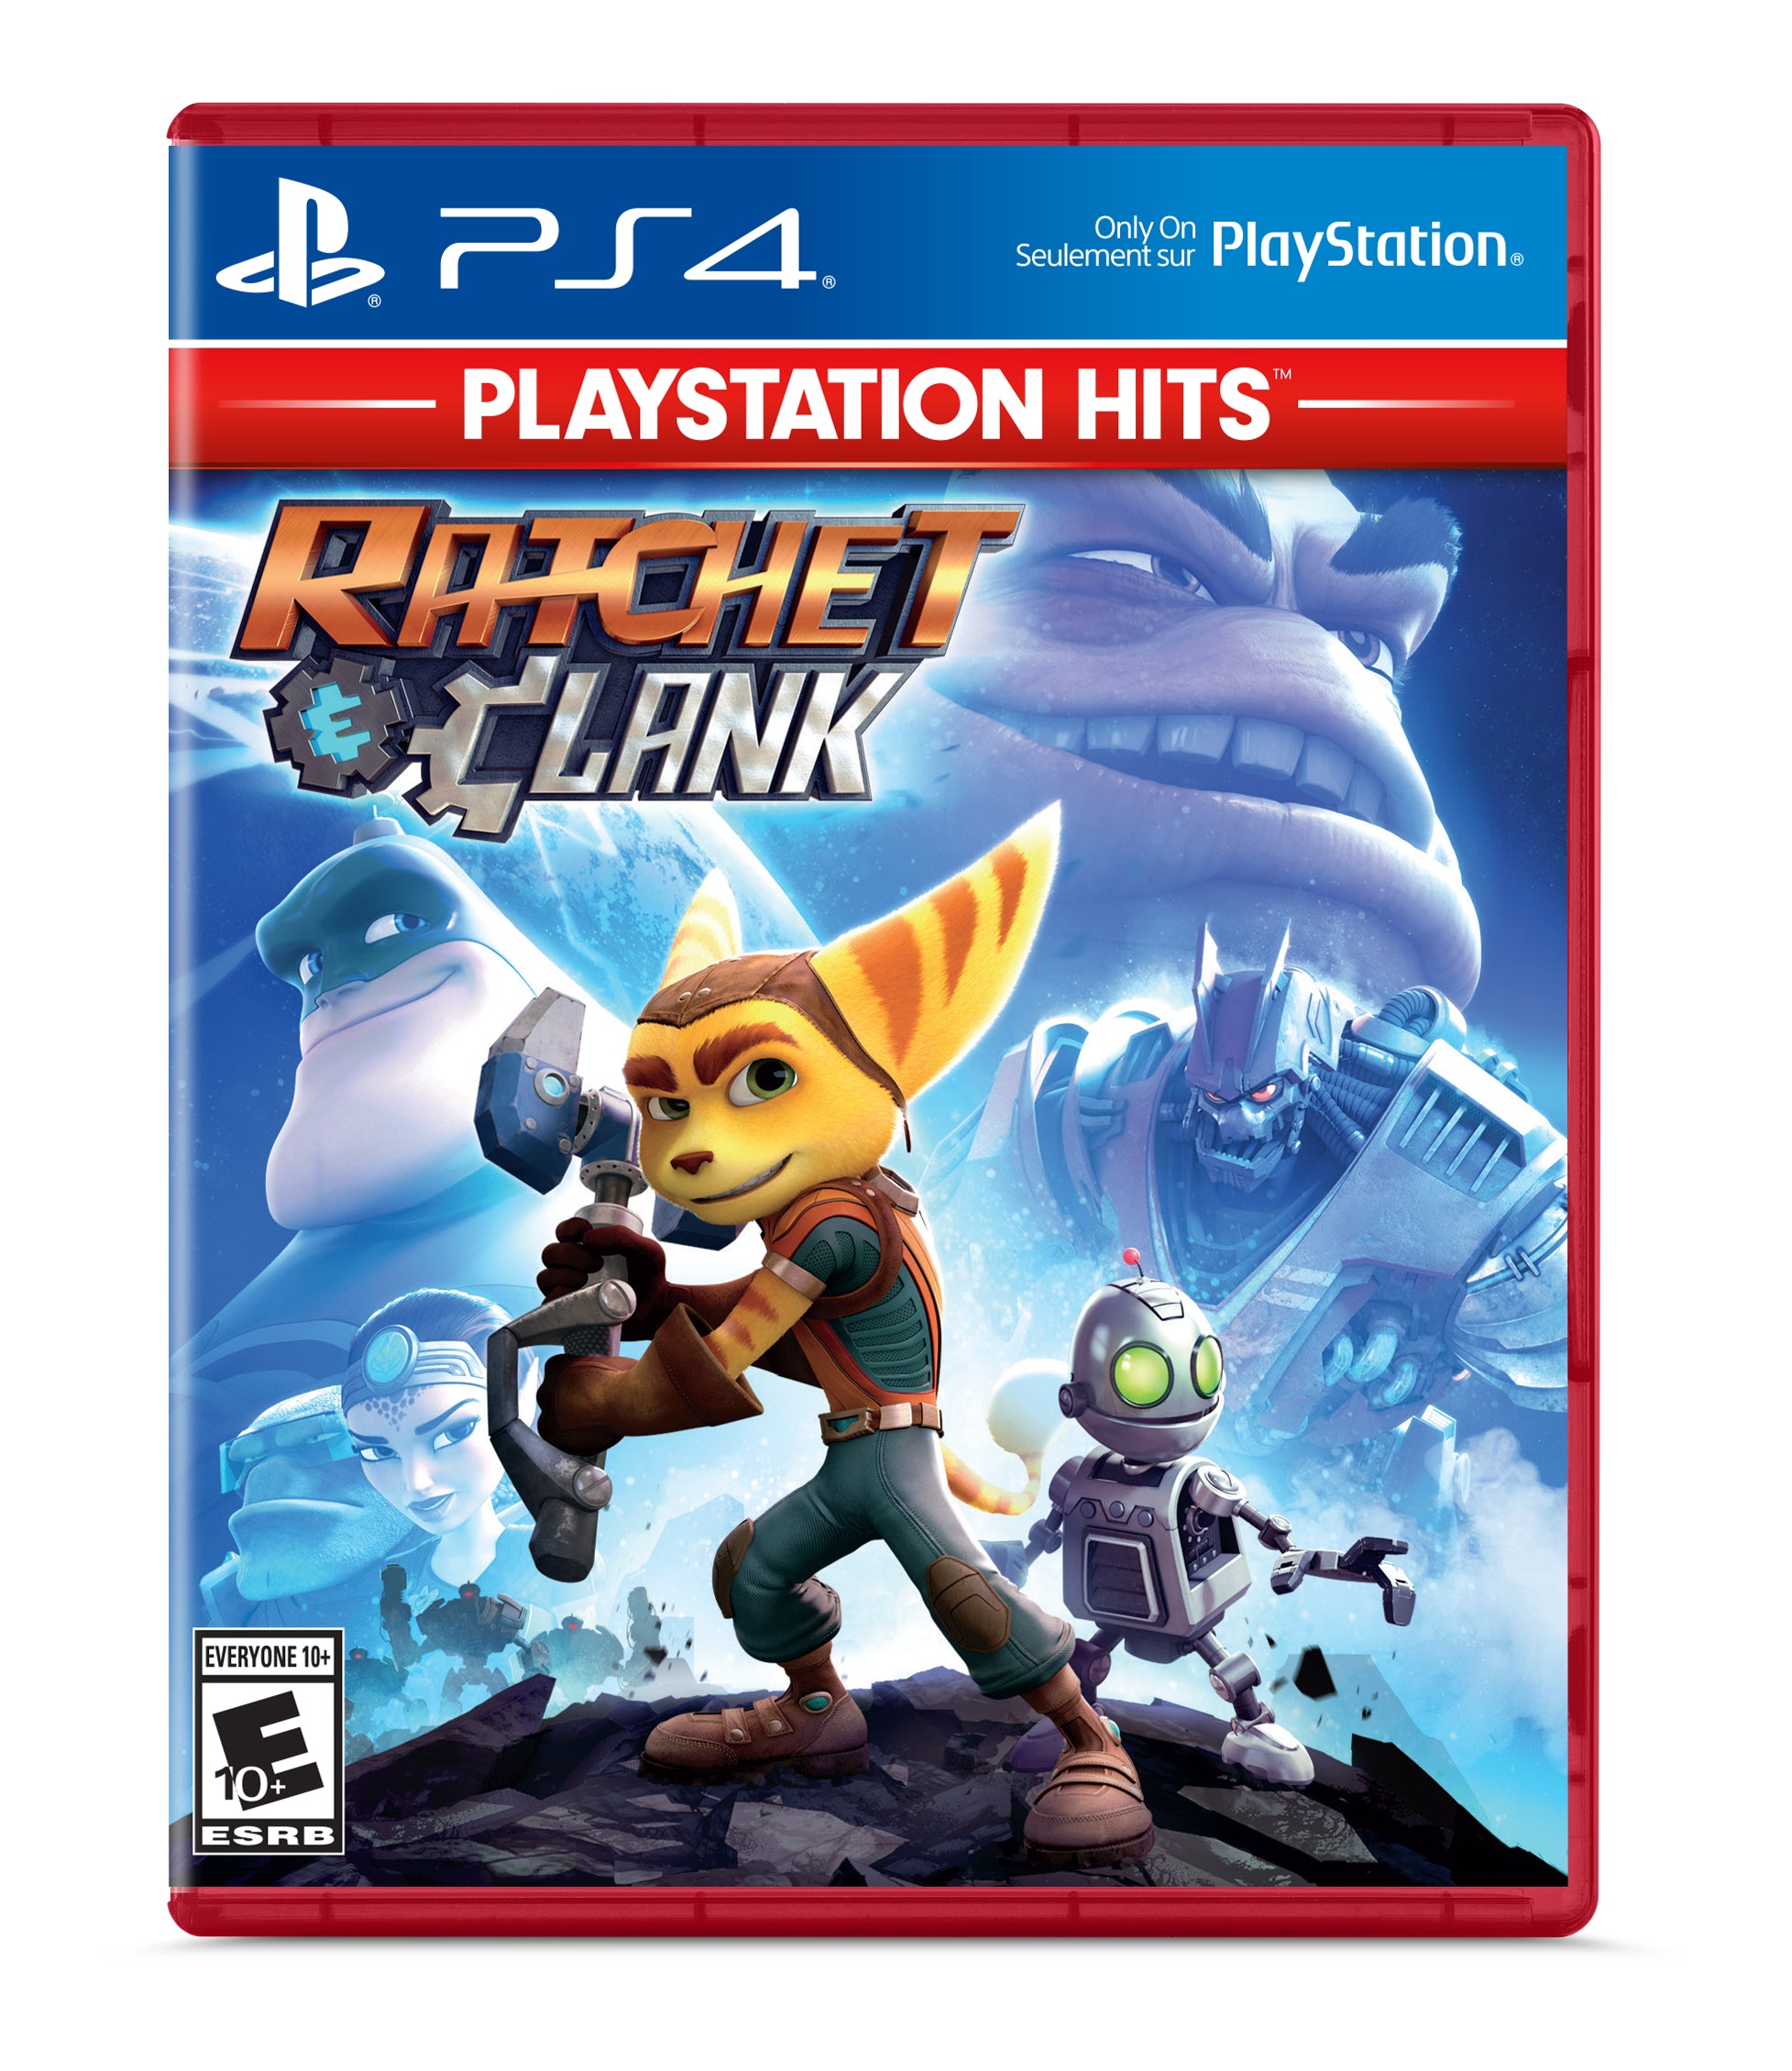 Sony PlayStation 4 Slim Ratchet & Clank Bundle Upgrade 2TB HDD PS4 Gaming Console, Jet Black, with Mytrix High Speed HDMI - Large Capacity Internal Hard Drive Enhanced PS4 Console